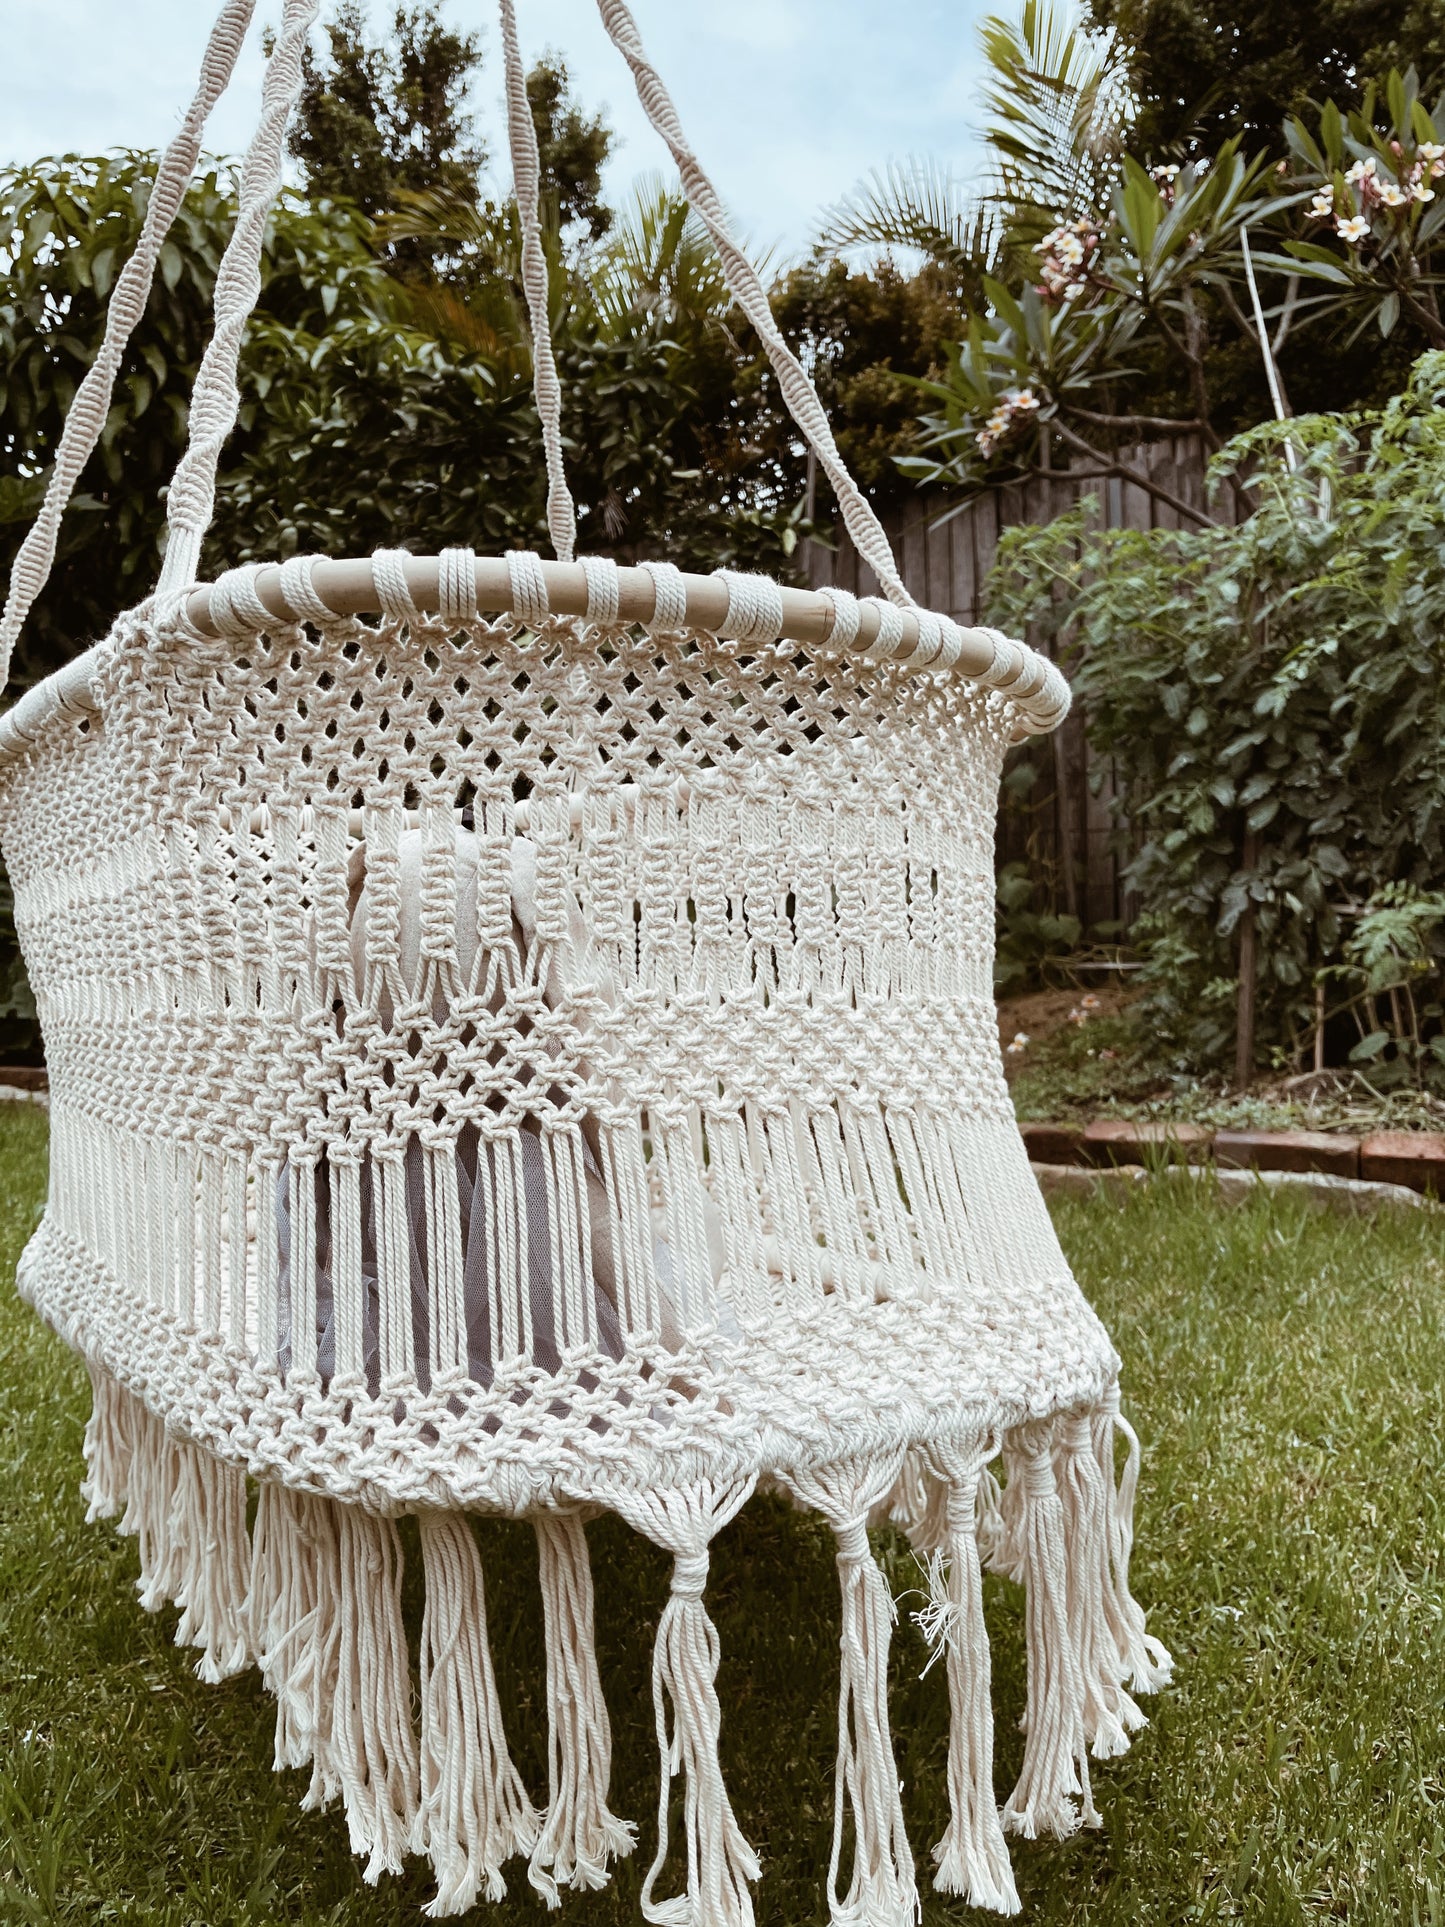 Macrame Baby Nursery Hanging Bassinet - Tight Knotted Style